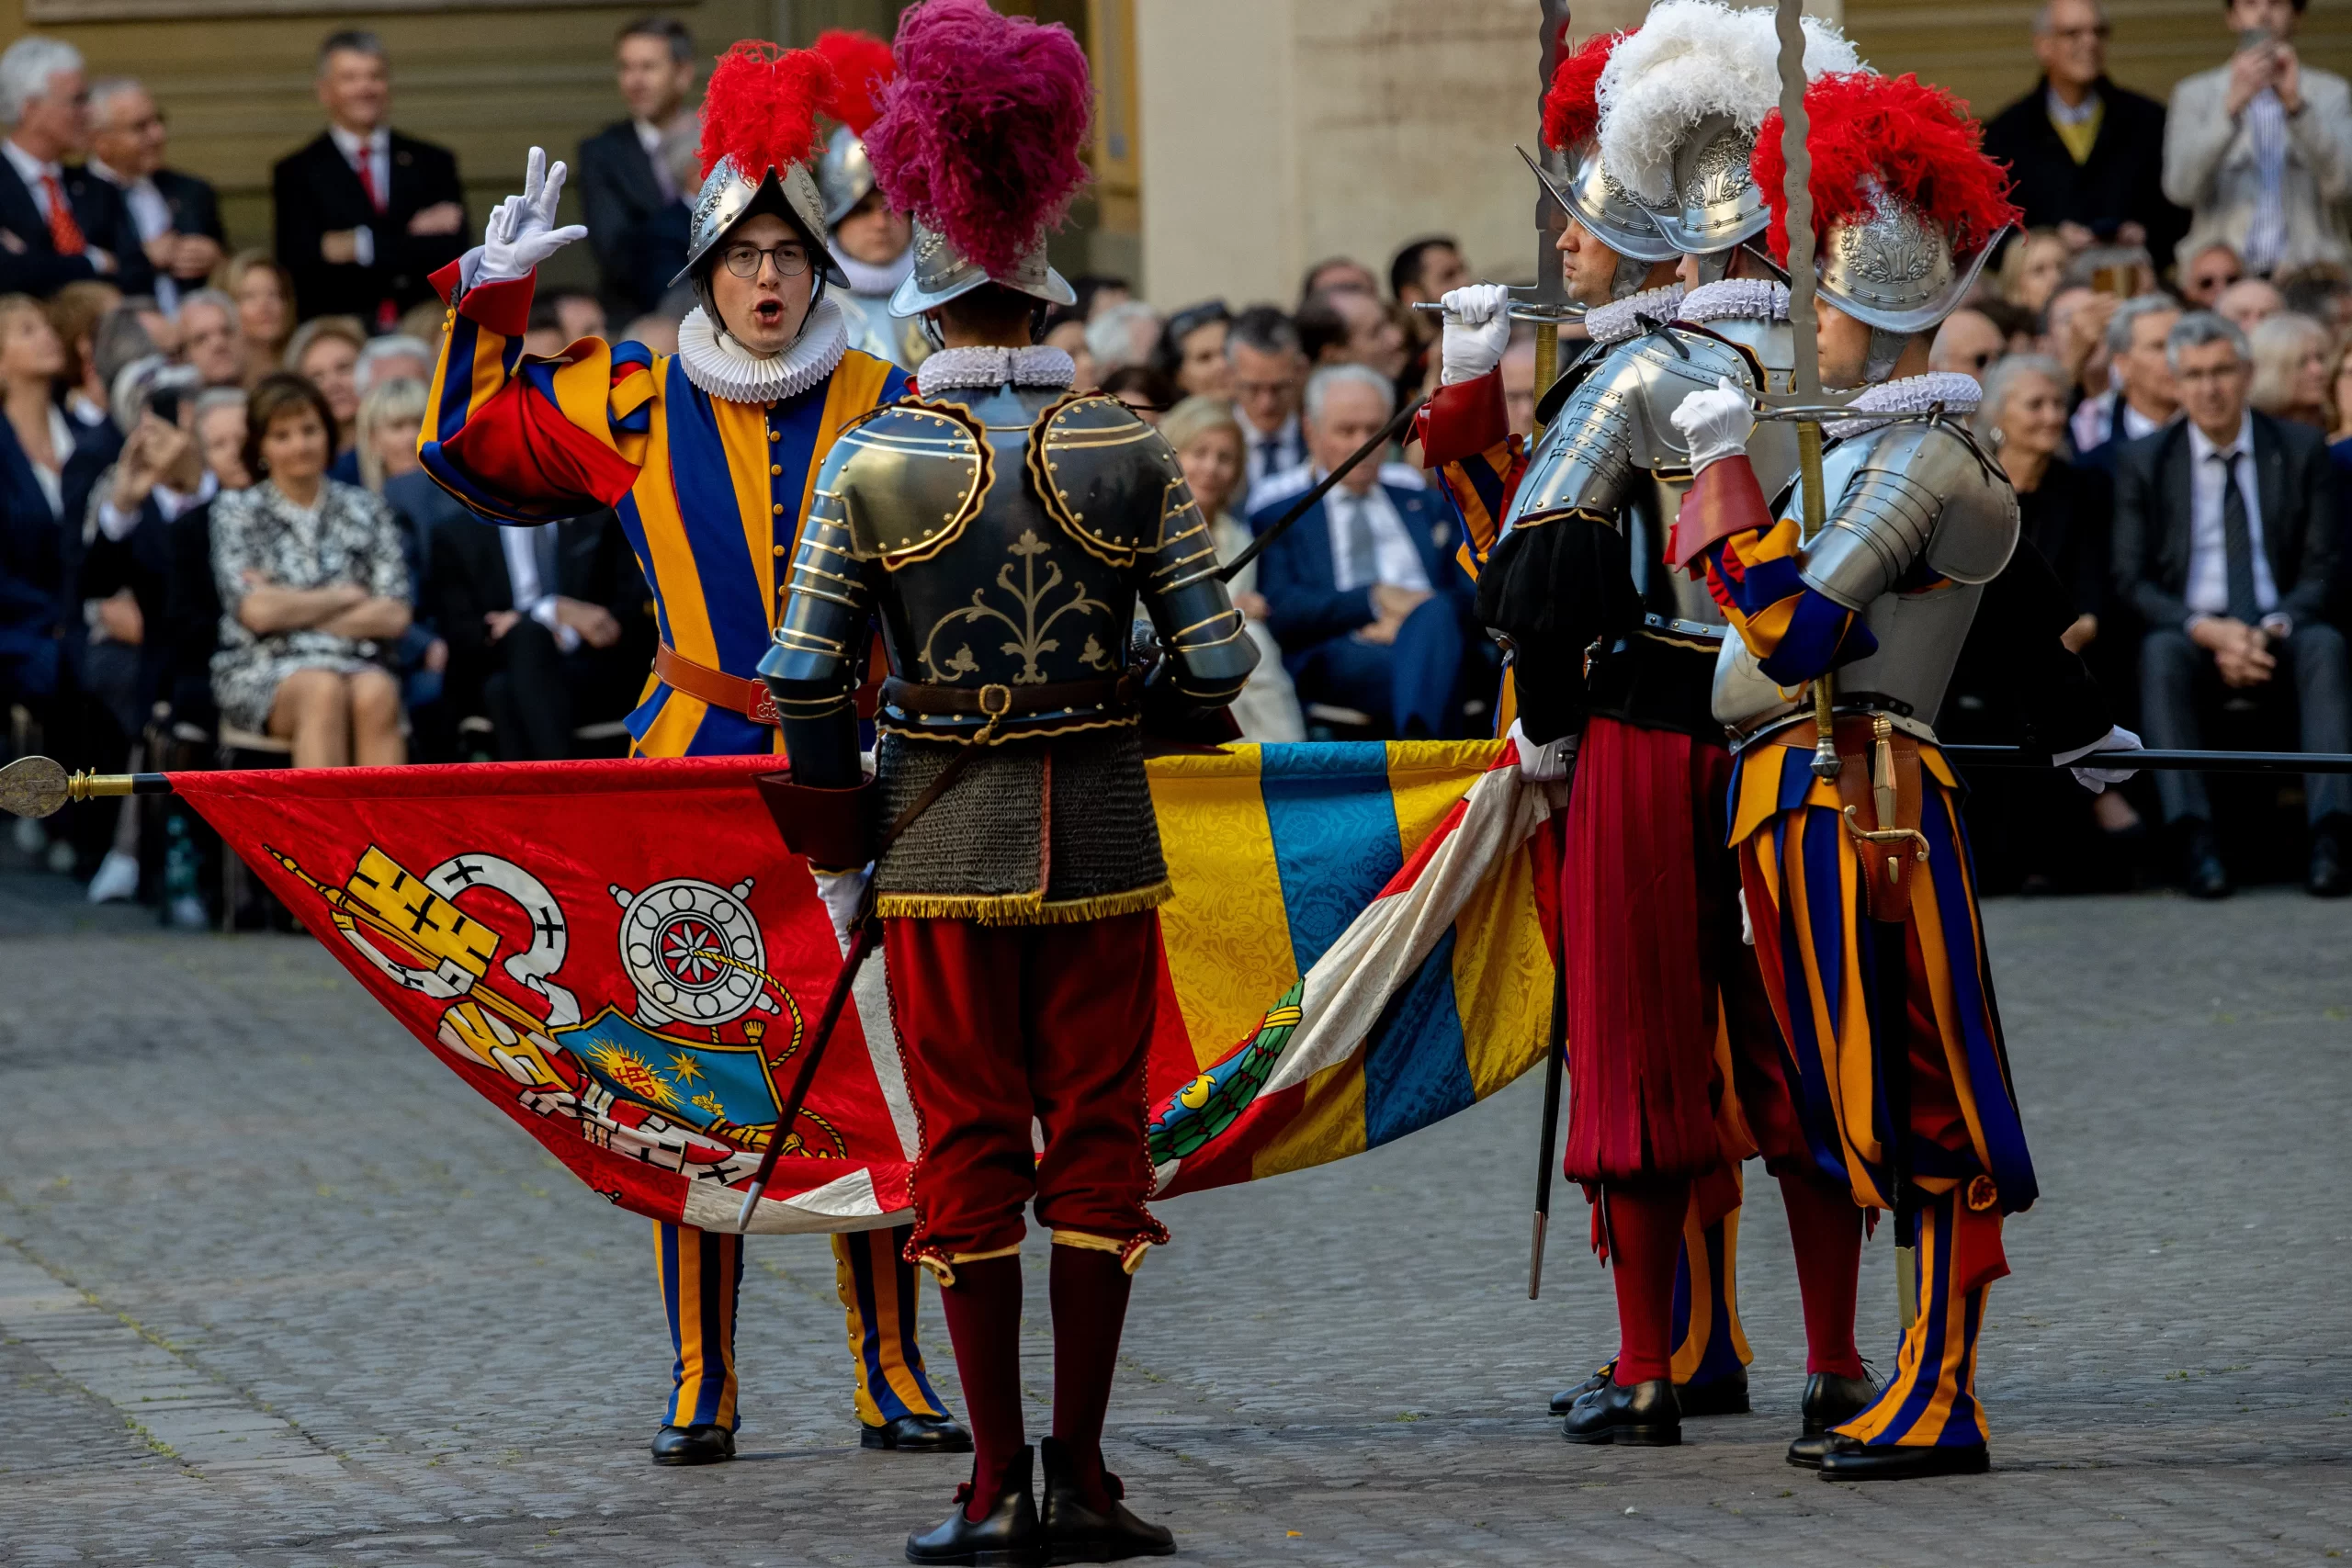 A new Swiss Guard swears to “faithfully, loyally and honorably serve the reigning Pontiff” during a ceremony on May 6, 2023. Daniel Ibanez/CNA